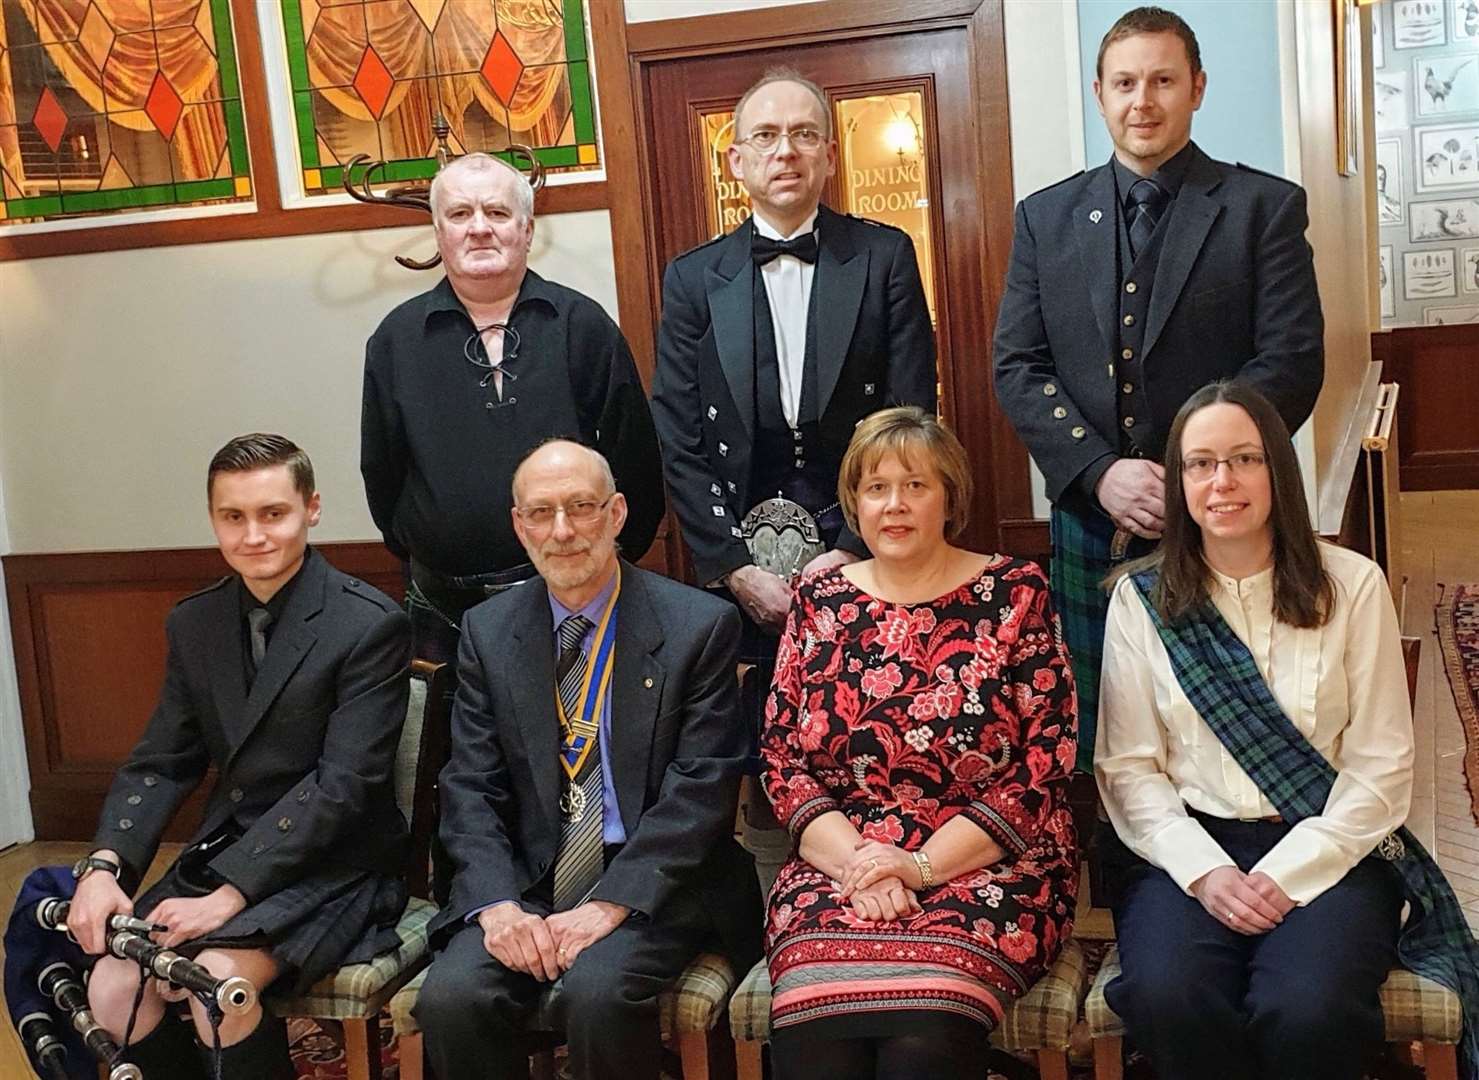 Front row, from left: Jack Manson, piper; Thurso Rotary president Alan Gerrard; Yardi Cumming, who replied on behalf of the lassies; Rotarian Charlotte Fisher, Selkirk Grace. Back row: Rotarian Kevin Sutherland, Toast to the Lassies; Rotarian Christopher Pearson, Immortal Memory; and Alan Mackay, who gave the Address to a Haggis.